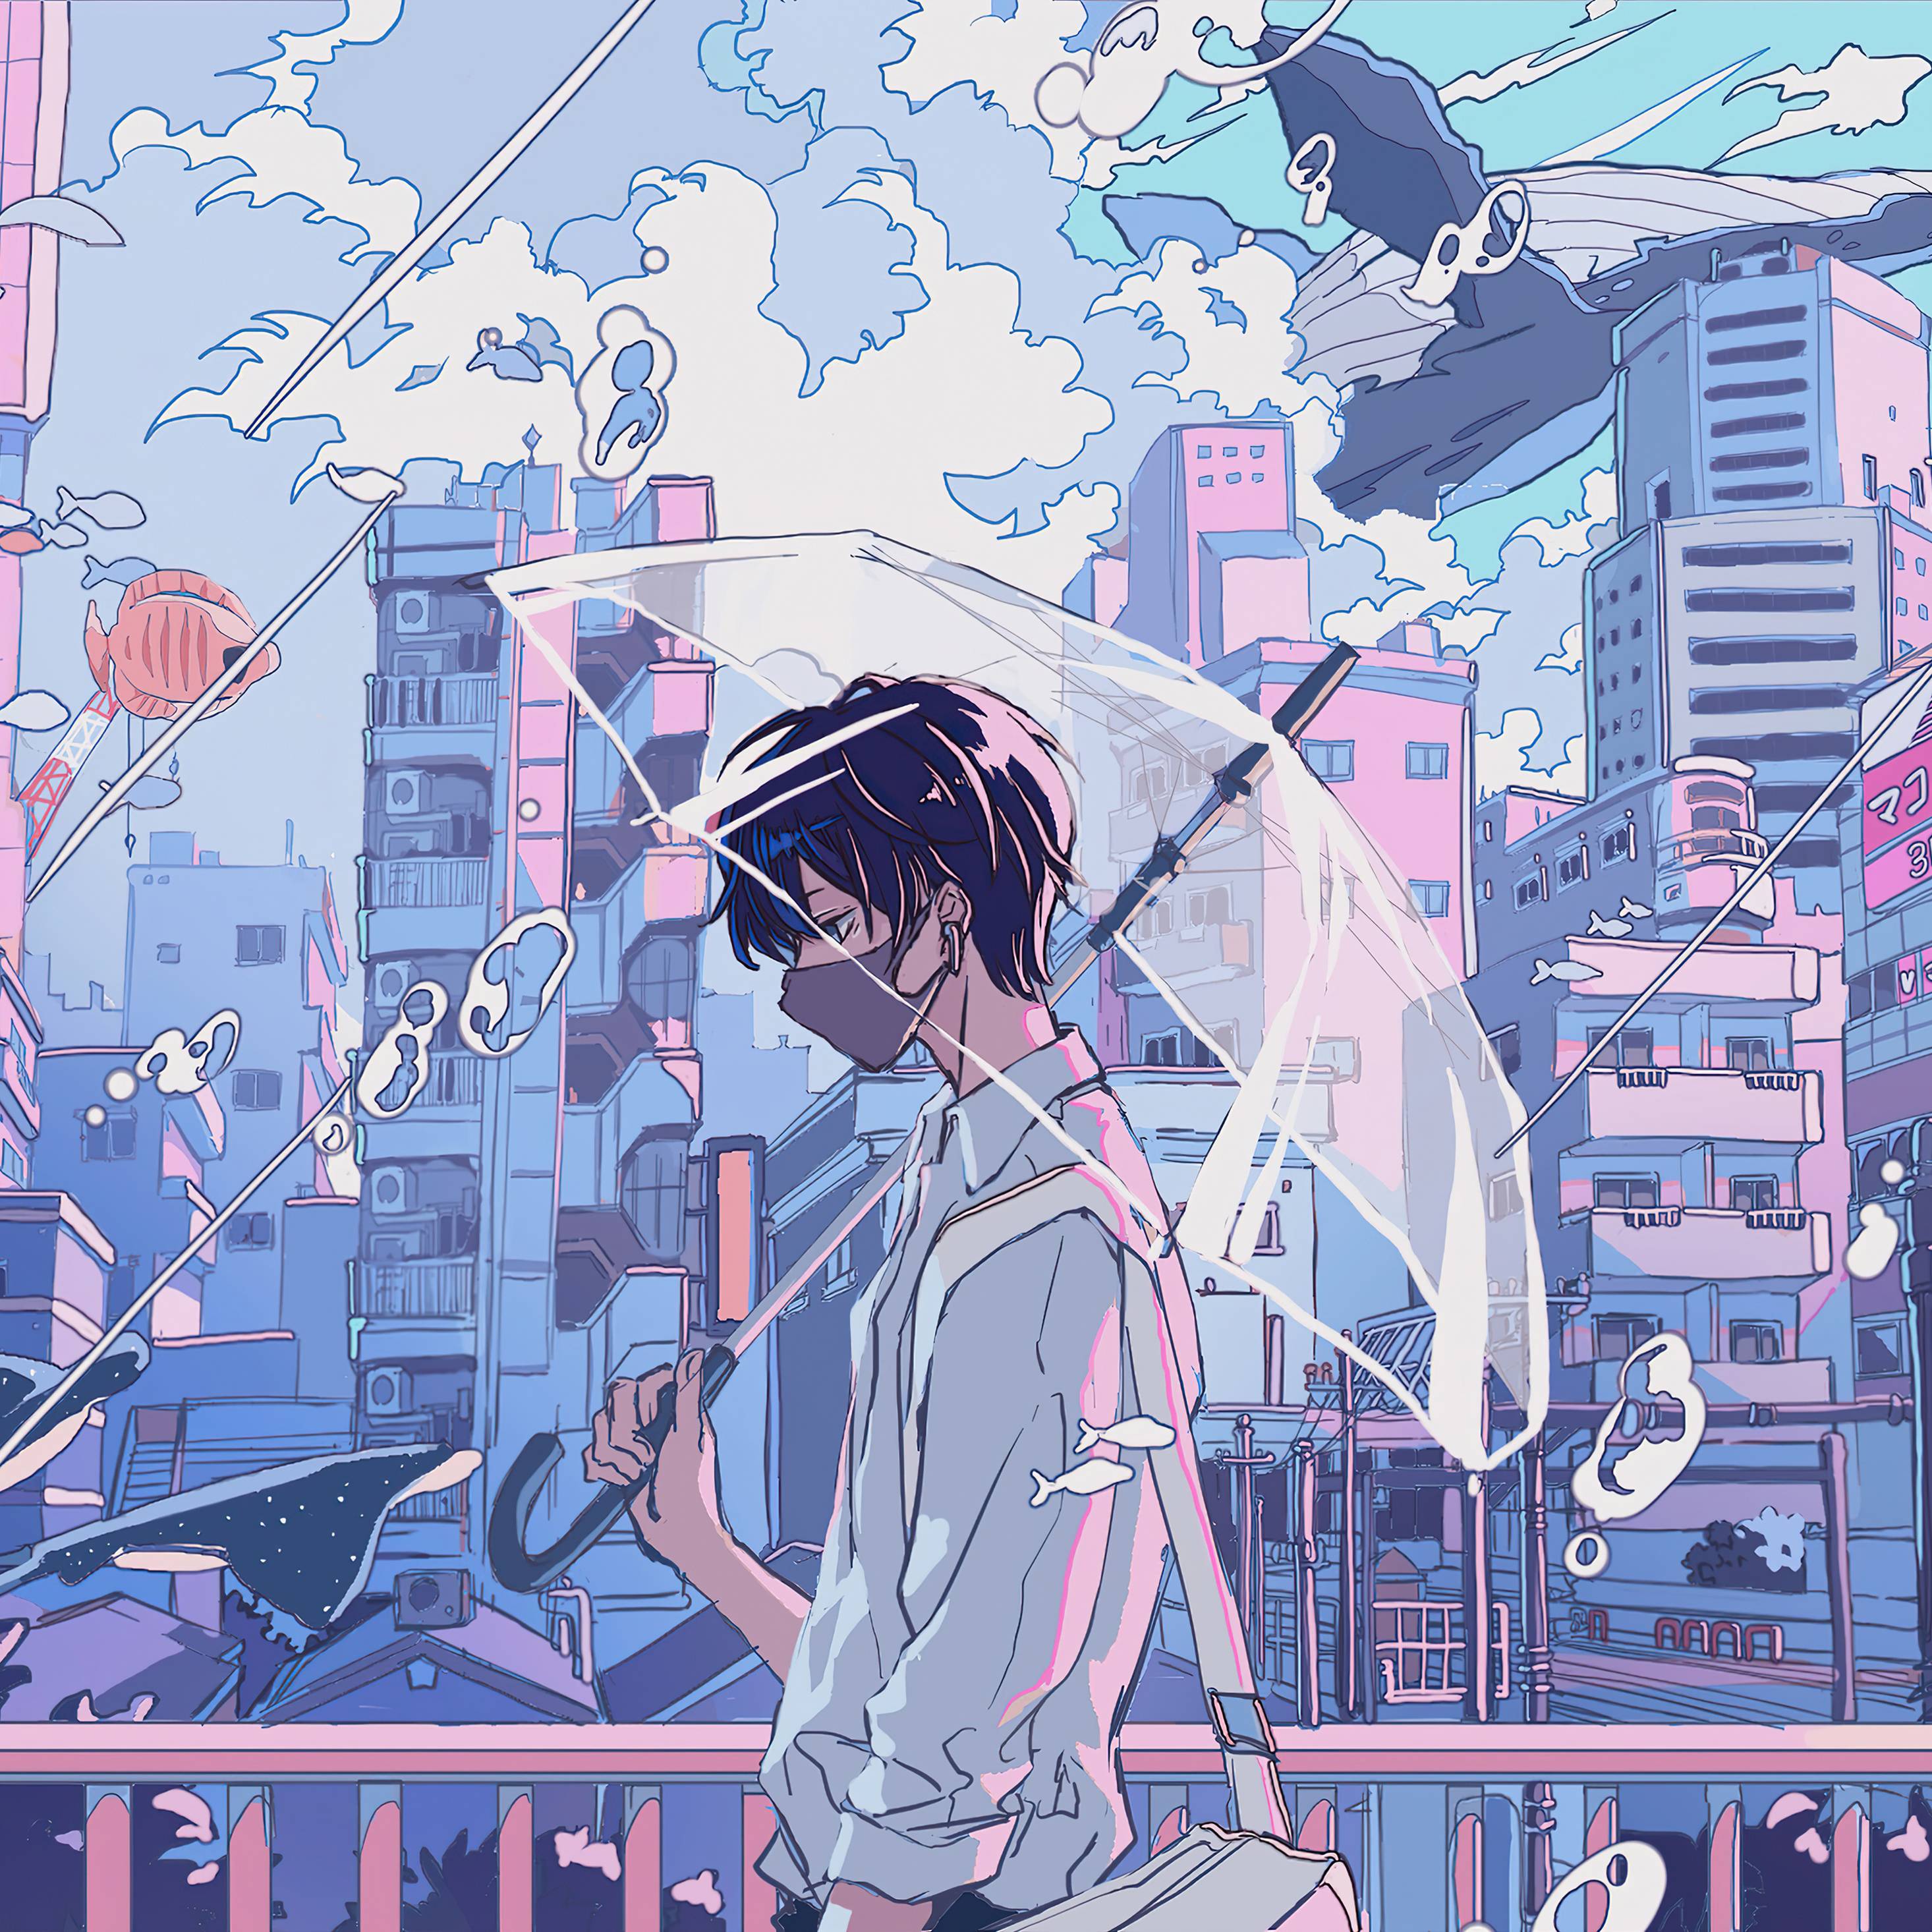 A man holding an umbrella in front of buildings - Underwater, anime